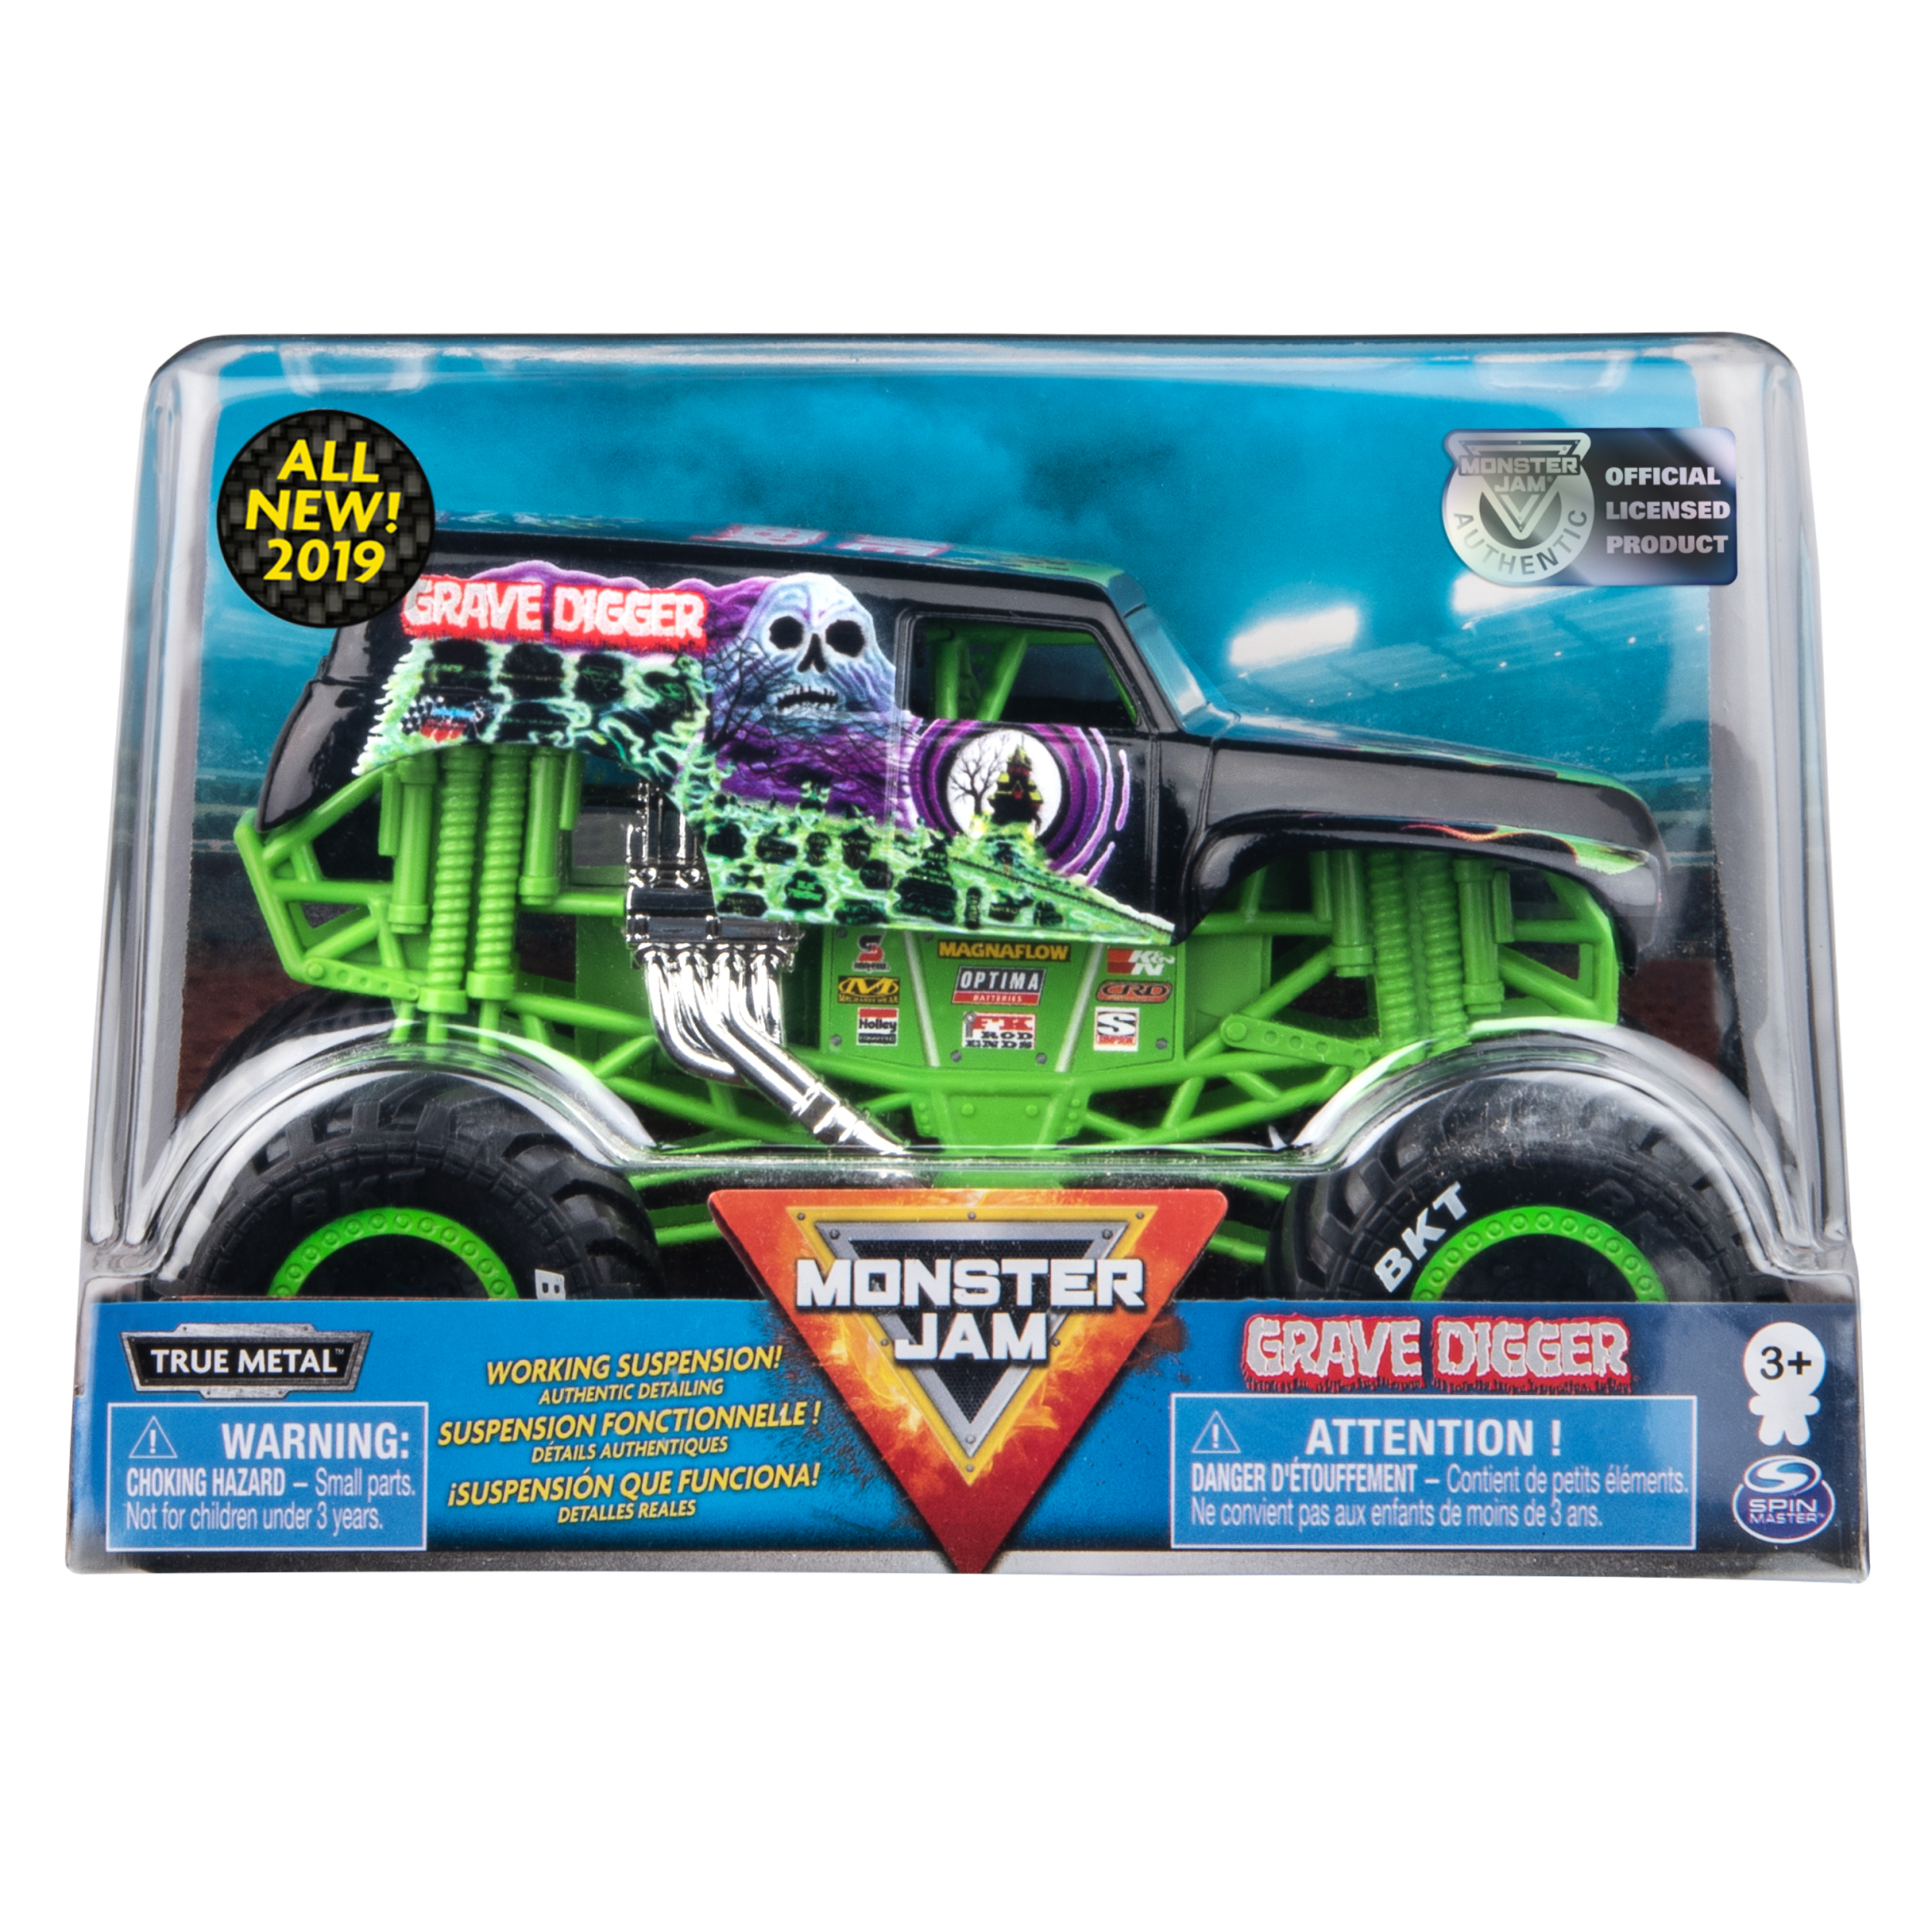 Monster Jam, Official Grave Digger Monster Truck, Die-Cast Vehicle, 1:24 Scale - image 1 of 5